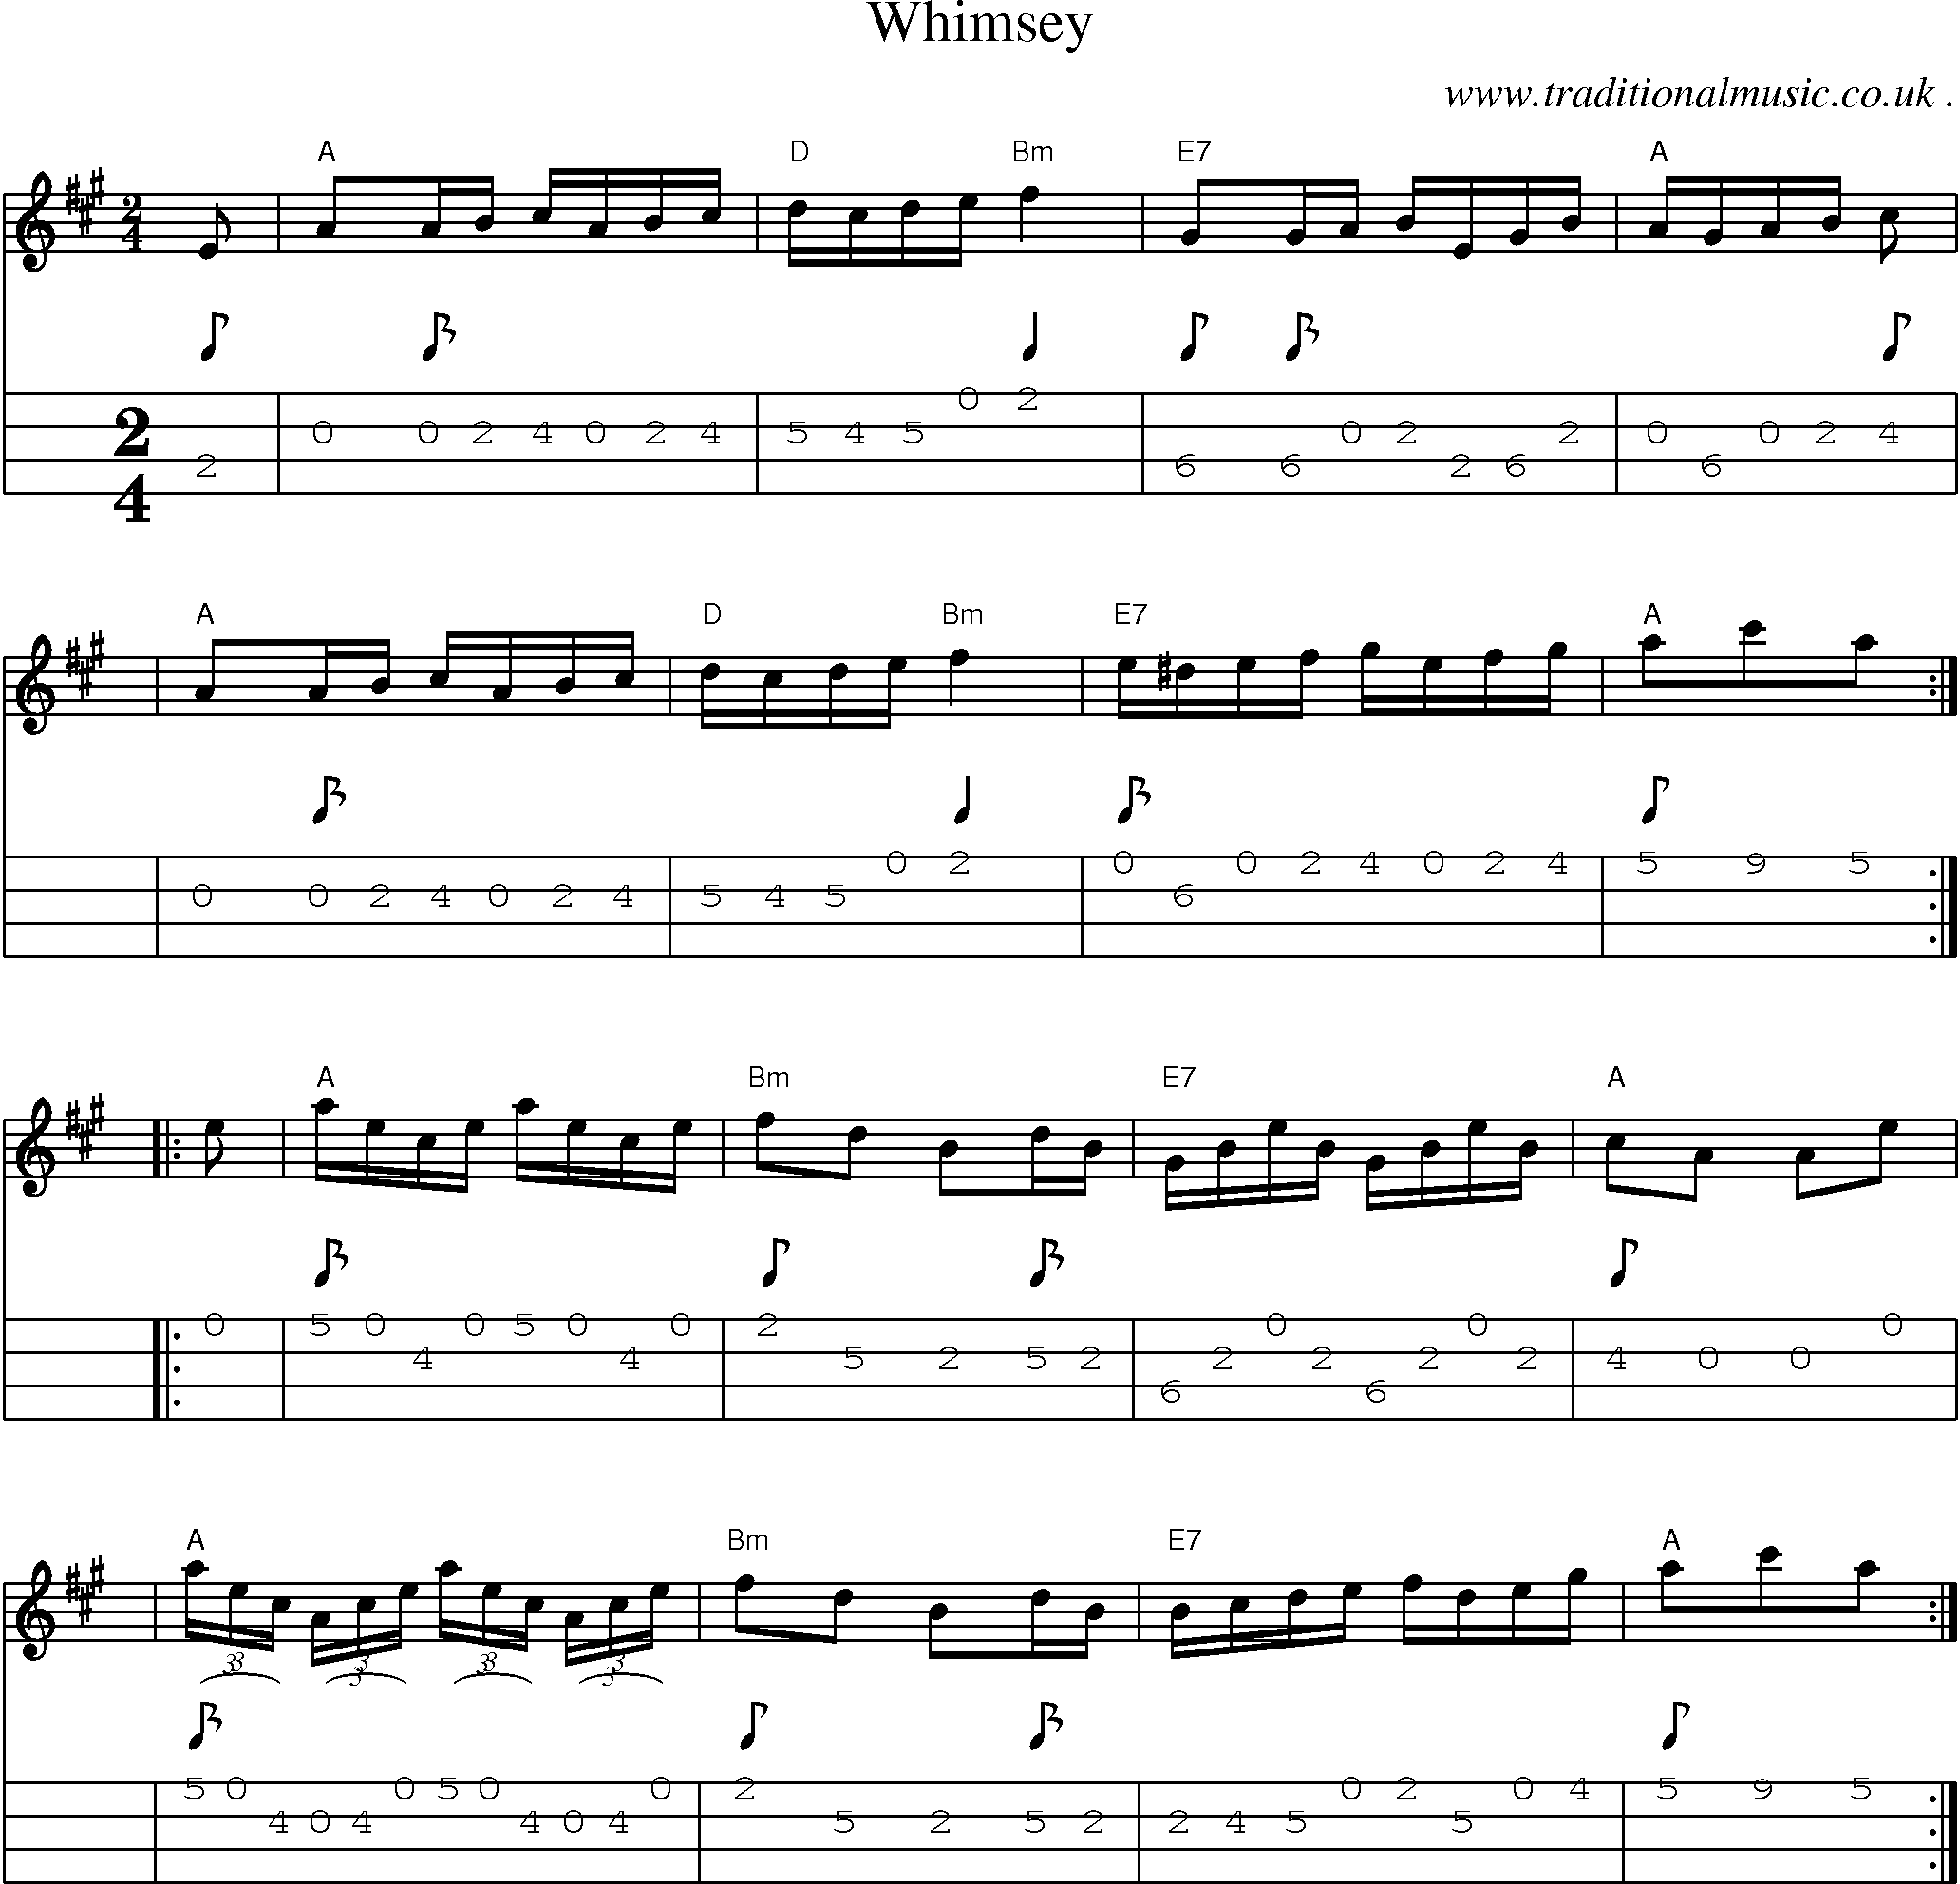 Sheet-music  score, Chords and Mandolin Tabs for Whimsey